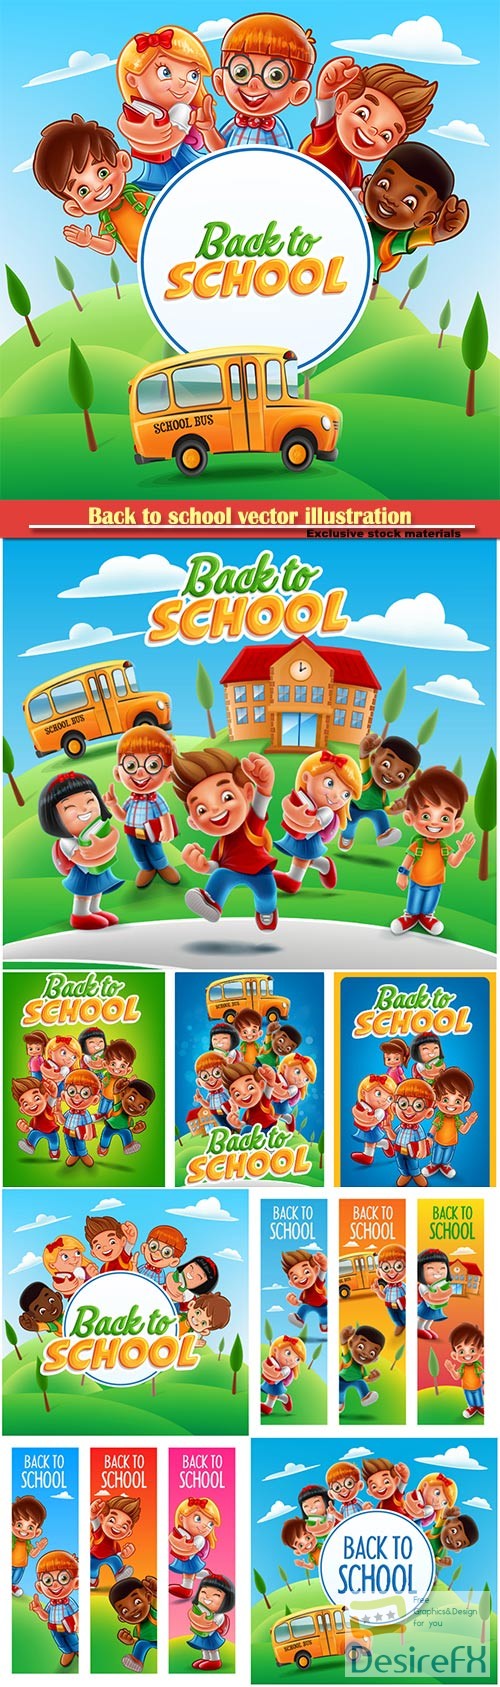 Back to school vector illustration, funny kids with school books